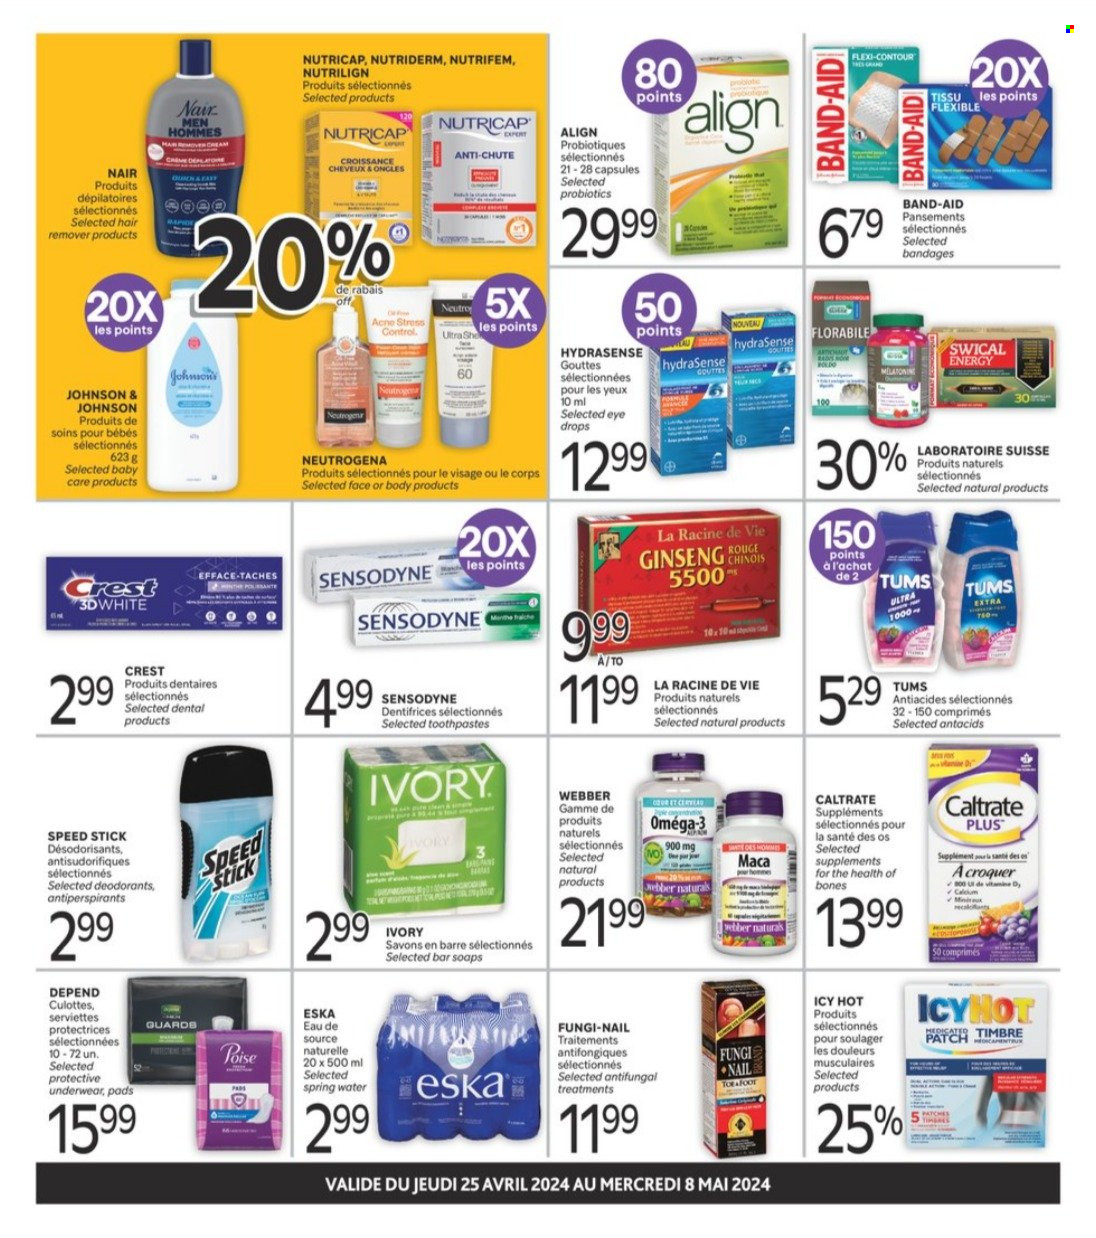 thumbnail - Brunet Clinique Flyer - April 25, 2024 - May 08, 2024 - Sales products - Johnson's, pads, toothpaste, Crest, Poise, Speed Stick, deodorant, contour, probiotics, Omega-3, ginseng, eye drops, Antacid, pain therapy, plaster, band-aid, Neutrogena, Sensodyne. Page 2.